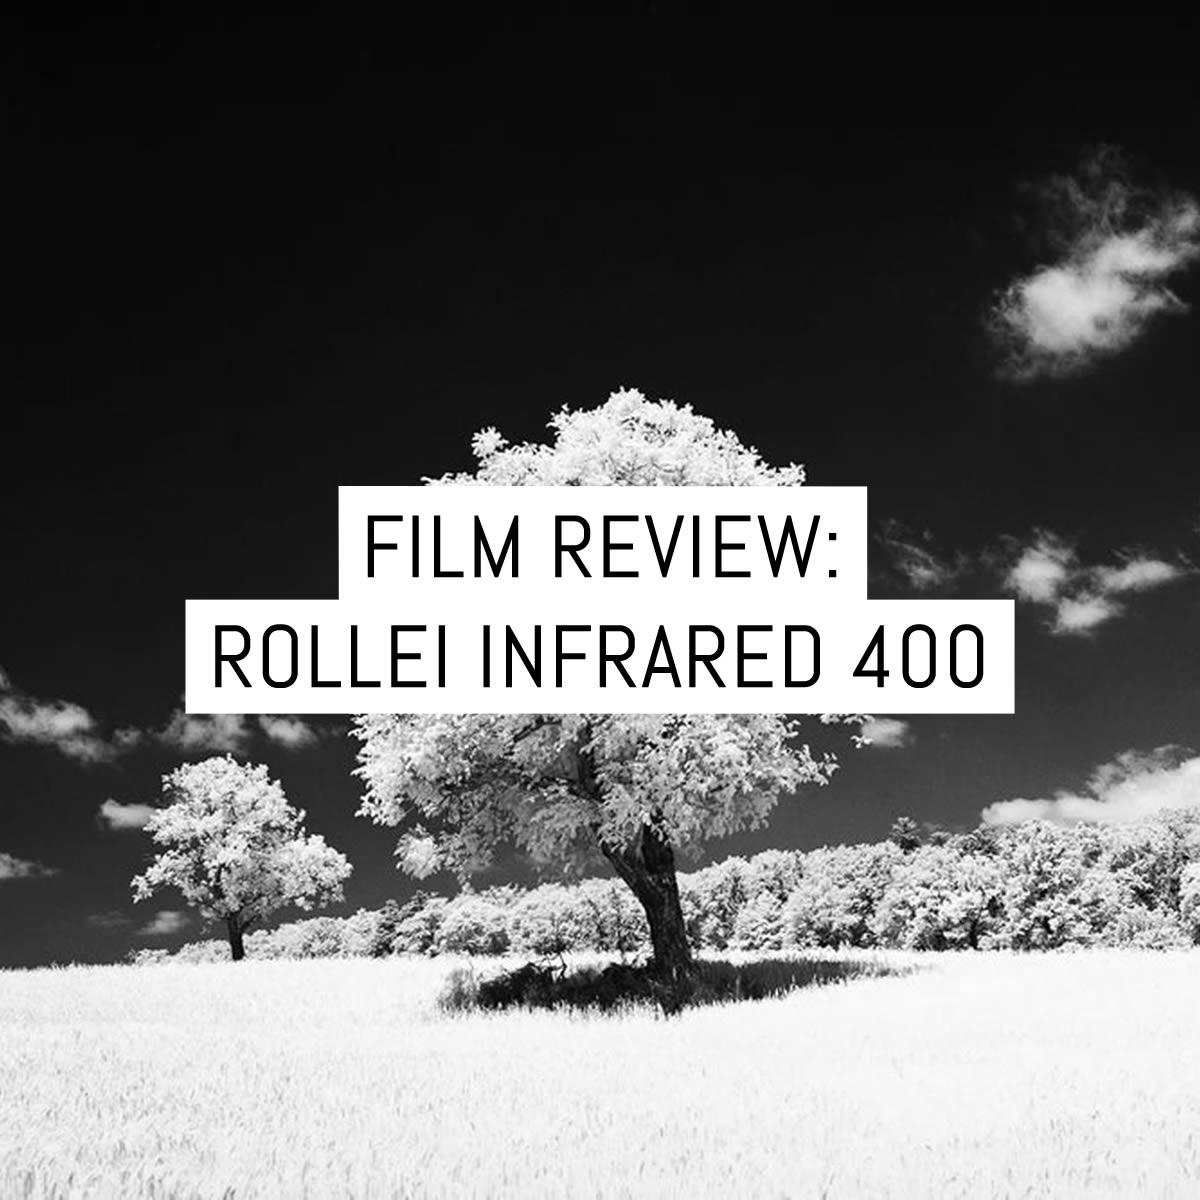 Cover - Film Review - Rollei Infrared 400